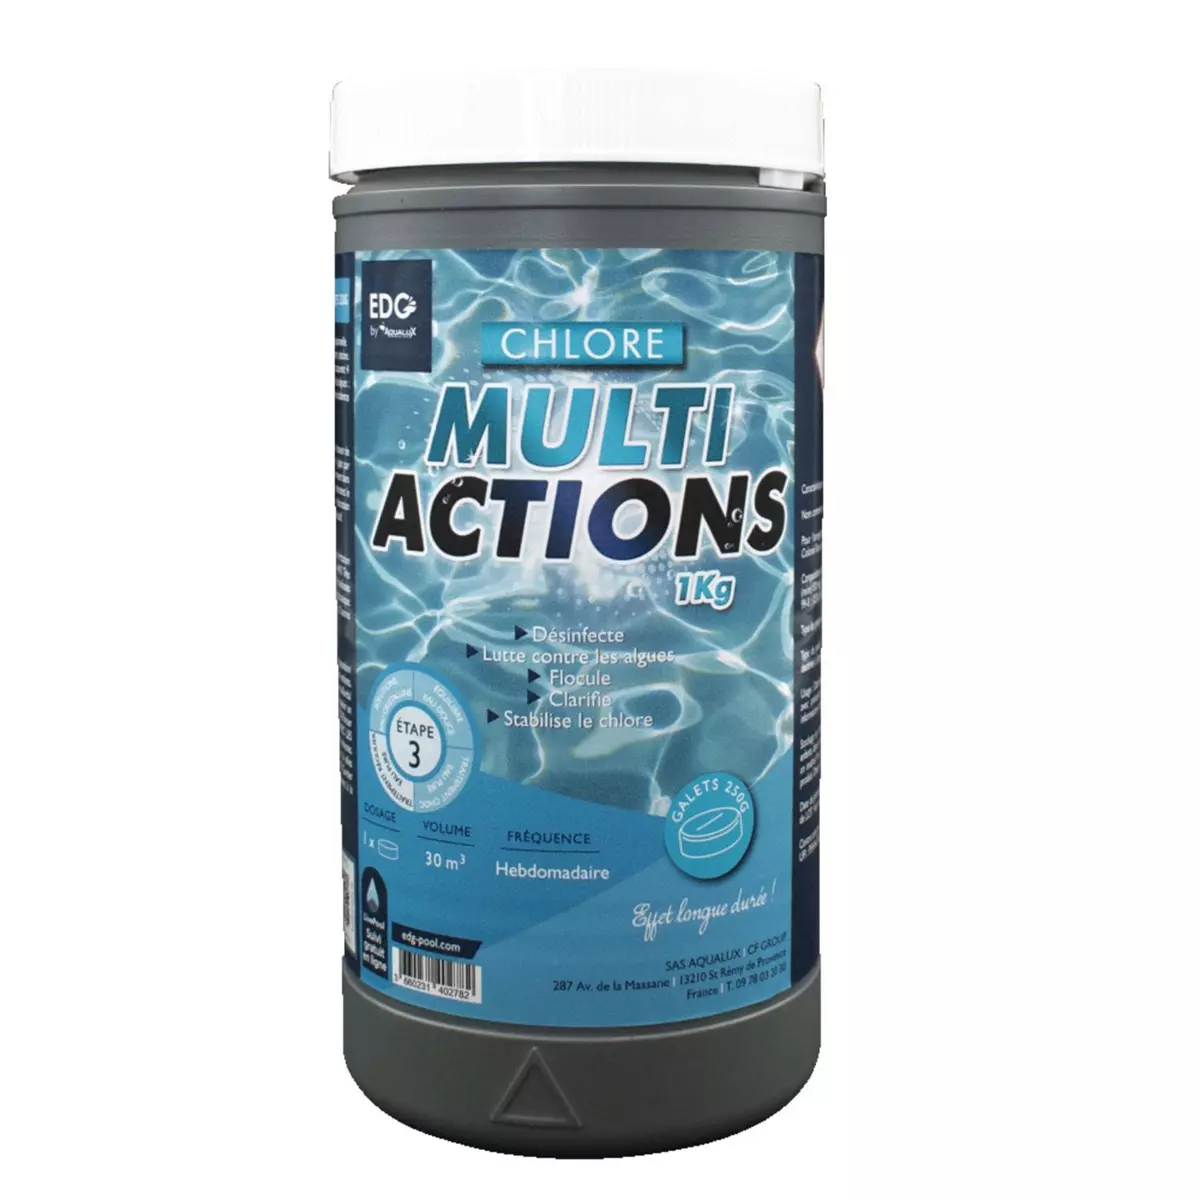 AQUALUX Chlore multi-actions galets 250g - 1kg